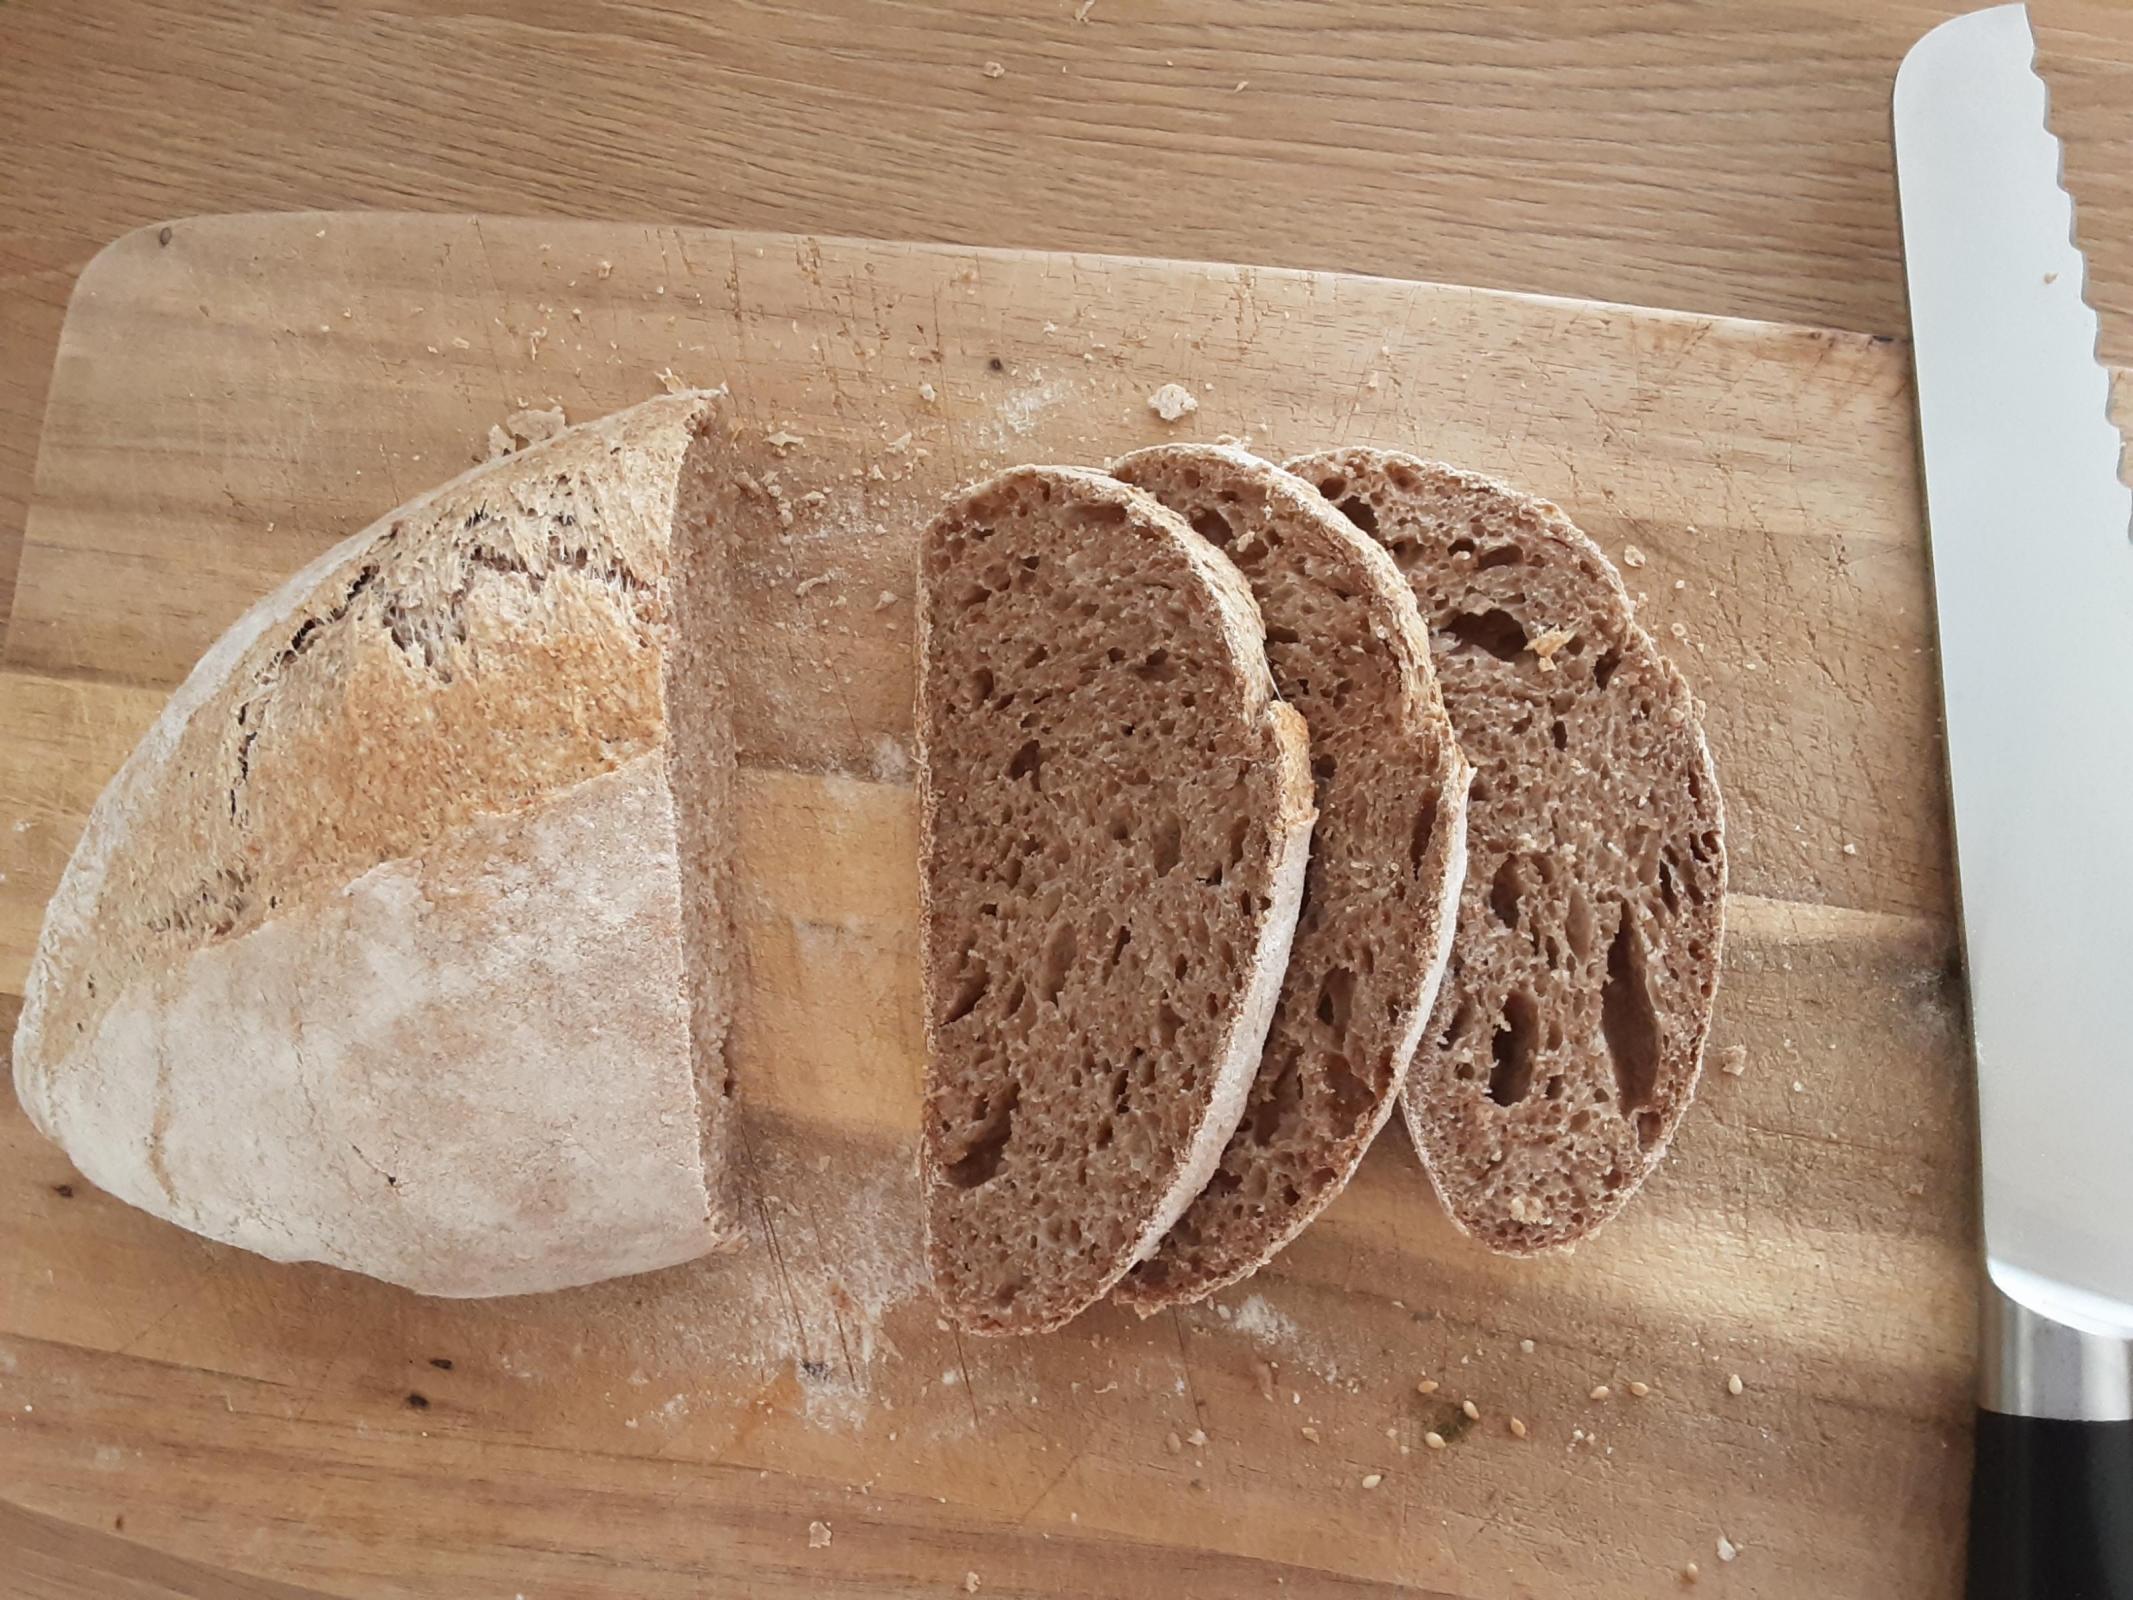 Here you can see what my loafs currently look like. This is 99% whole wheat with sourdough. I was quite happy with the crumb, not with the crust..